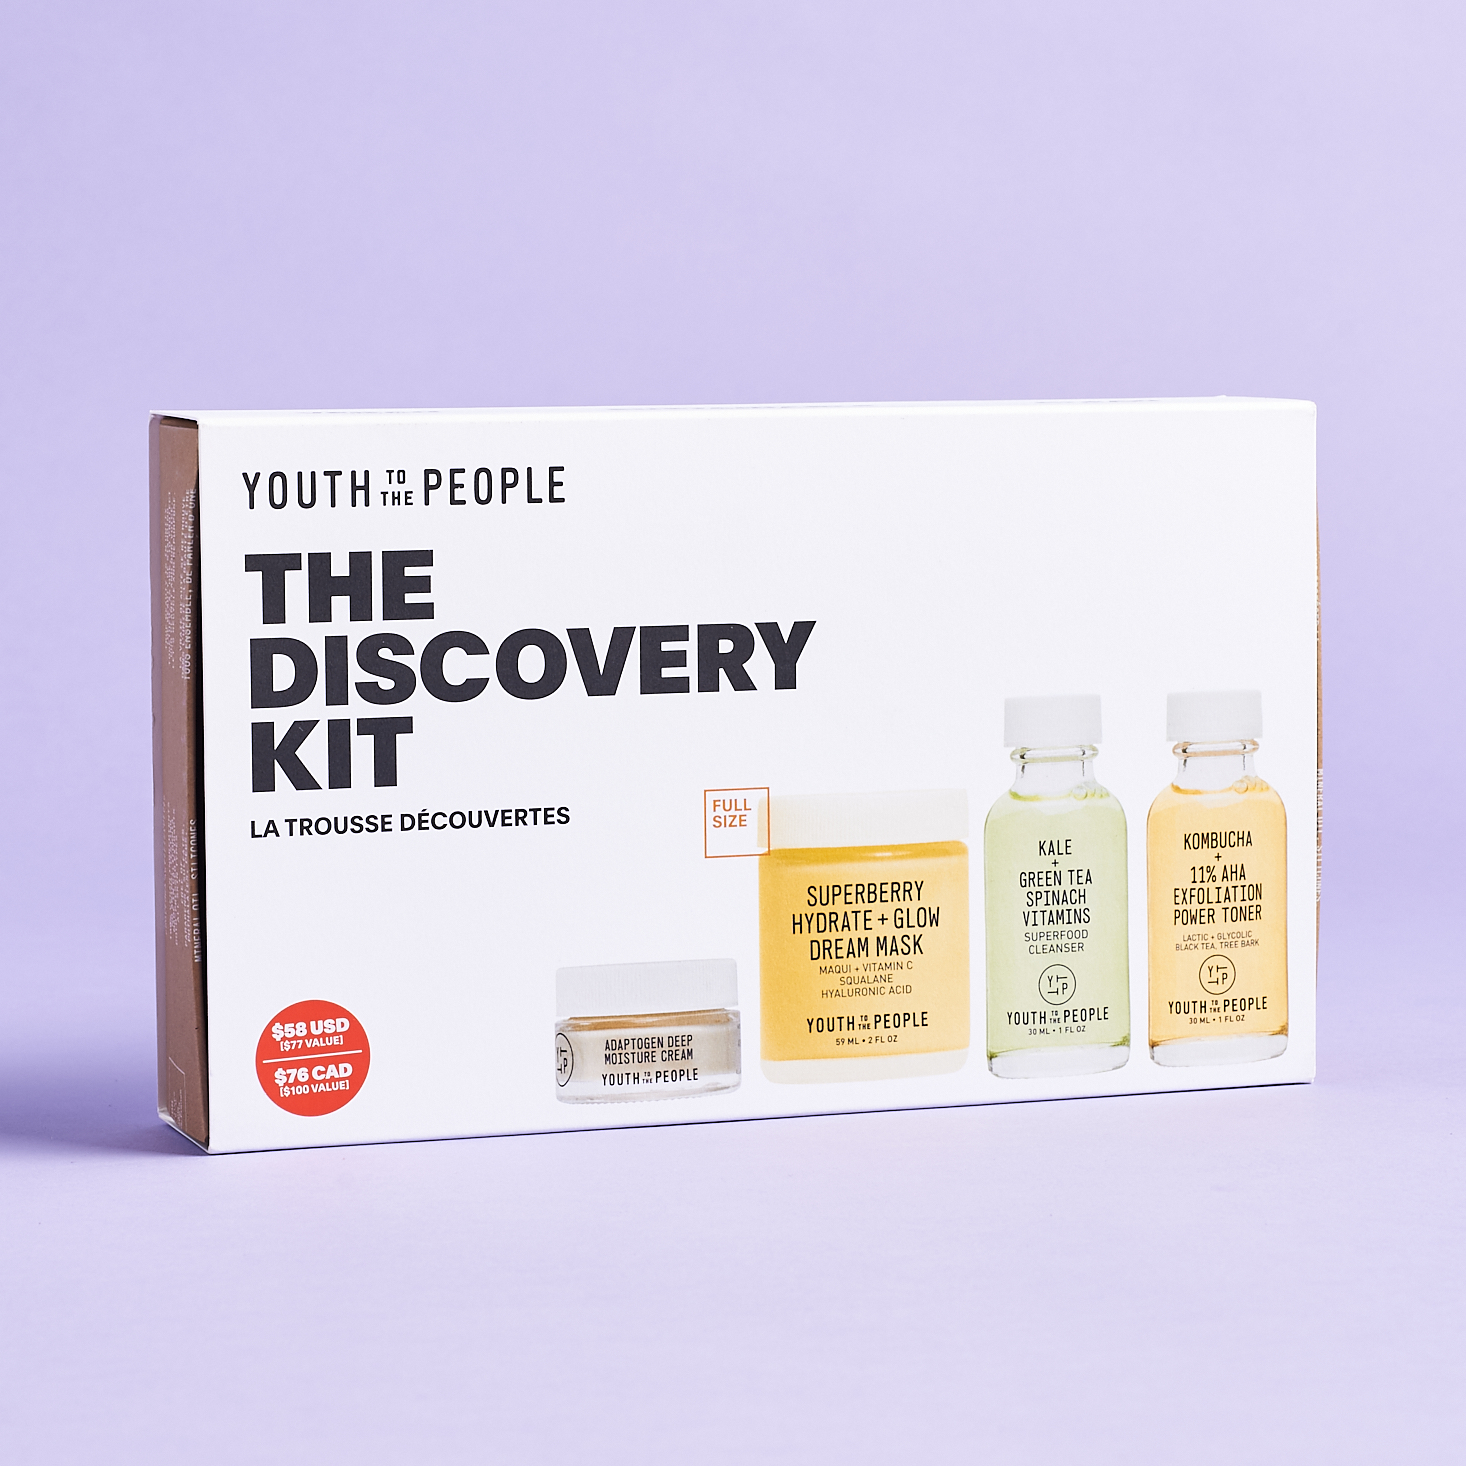 Youth To The People The Discovery Kit Review – February 2020